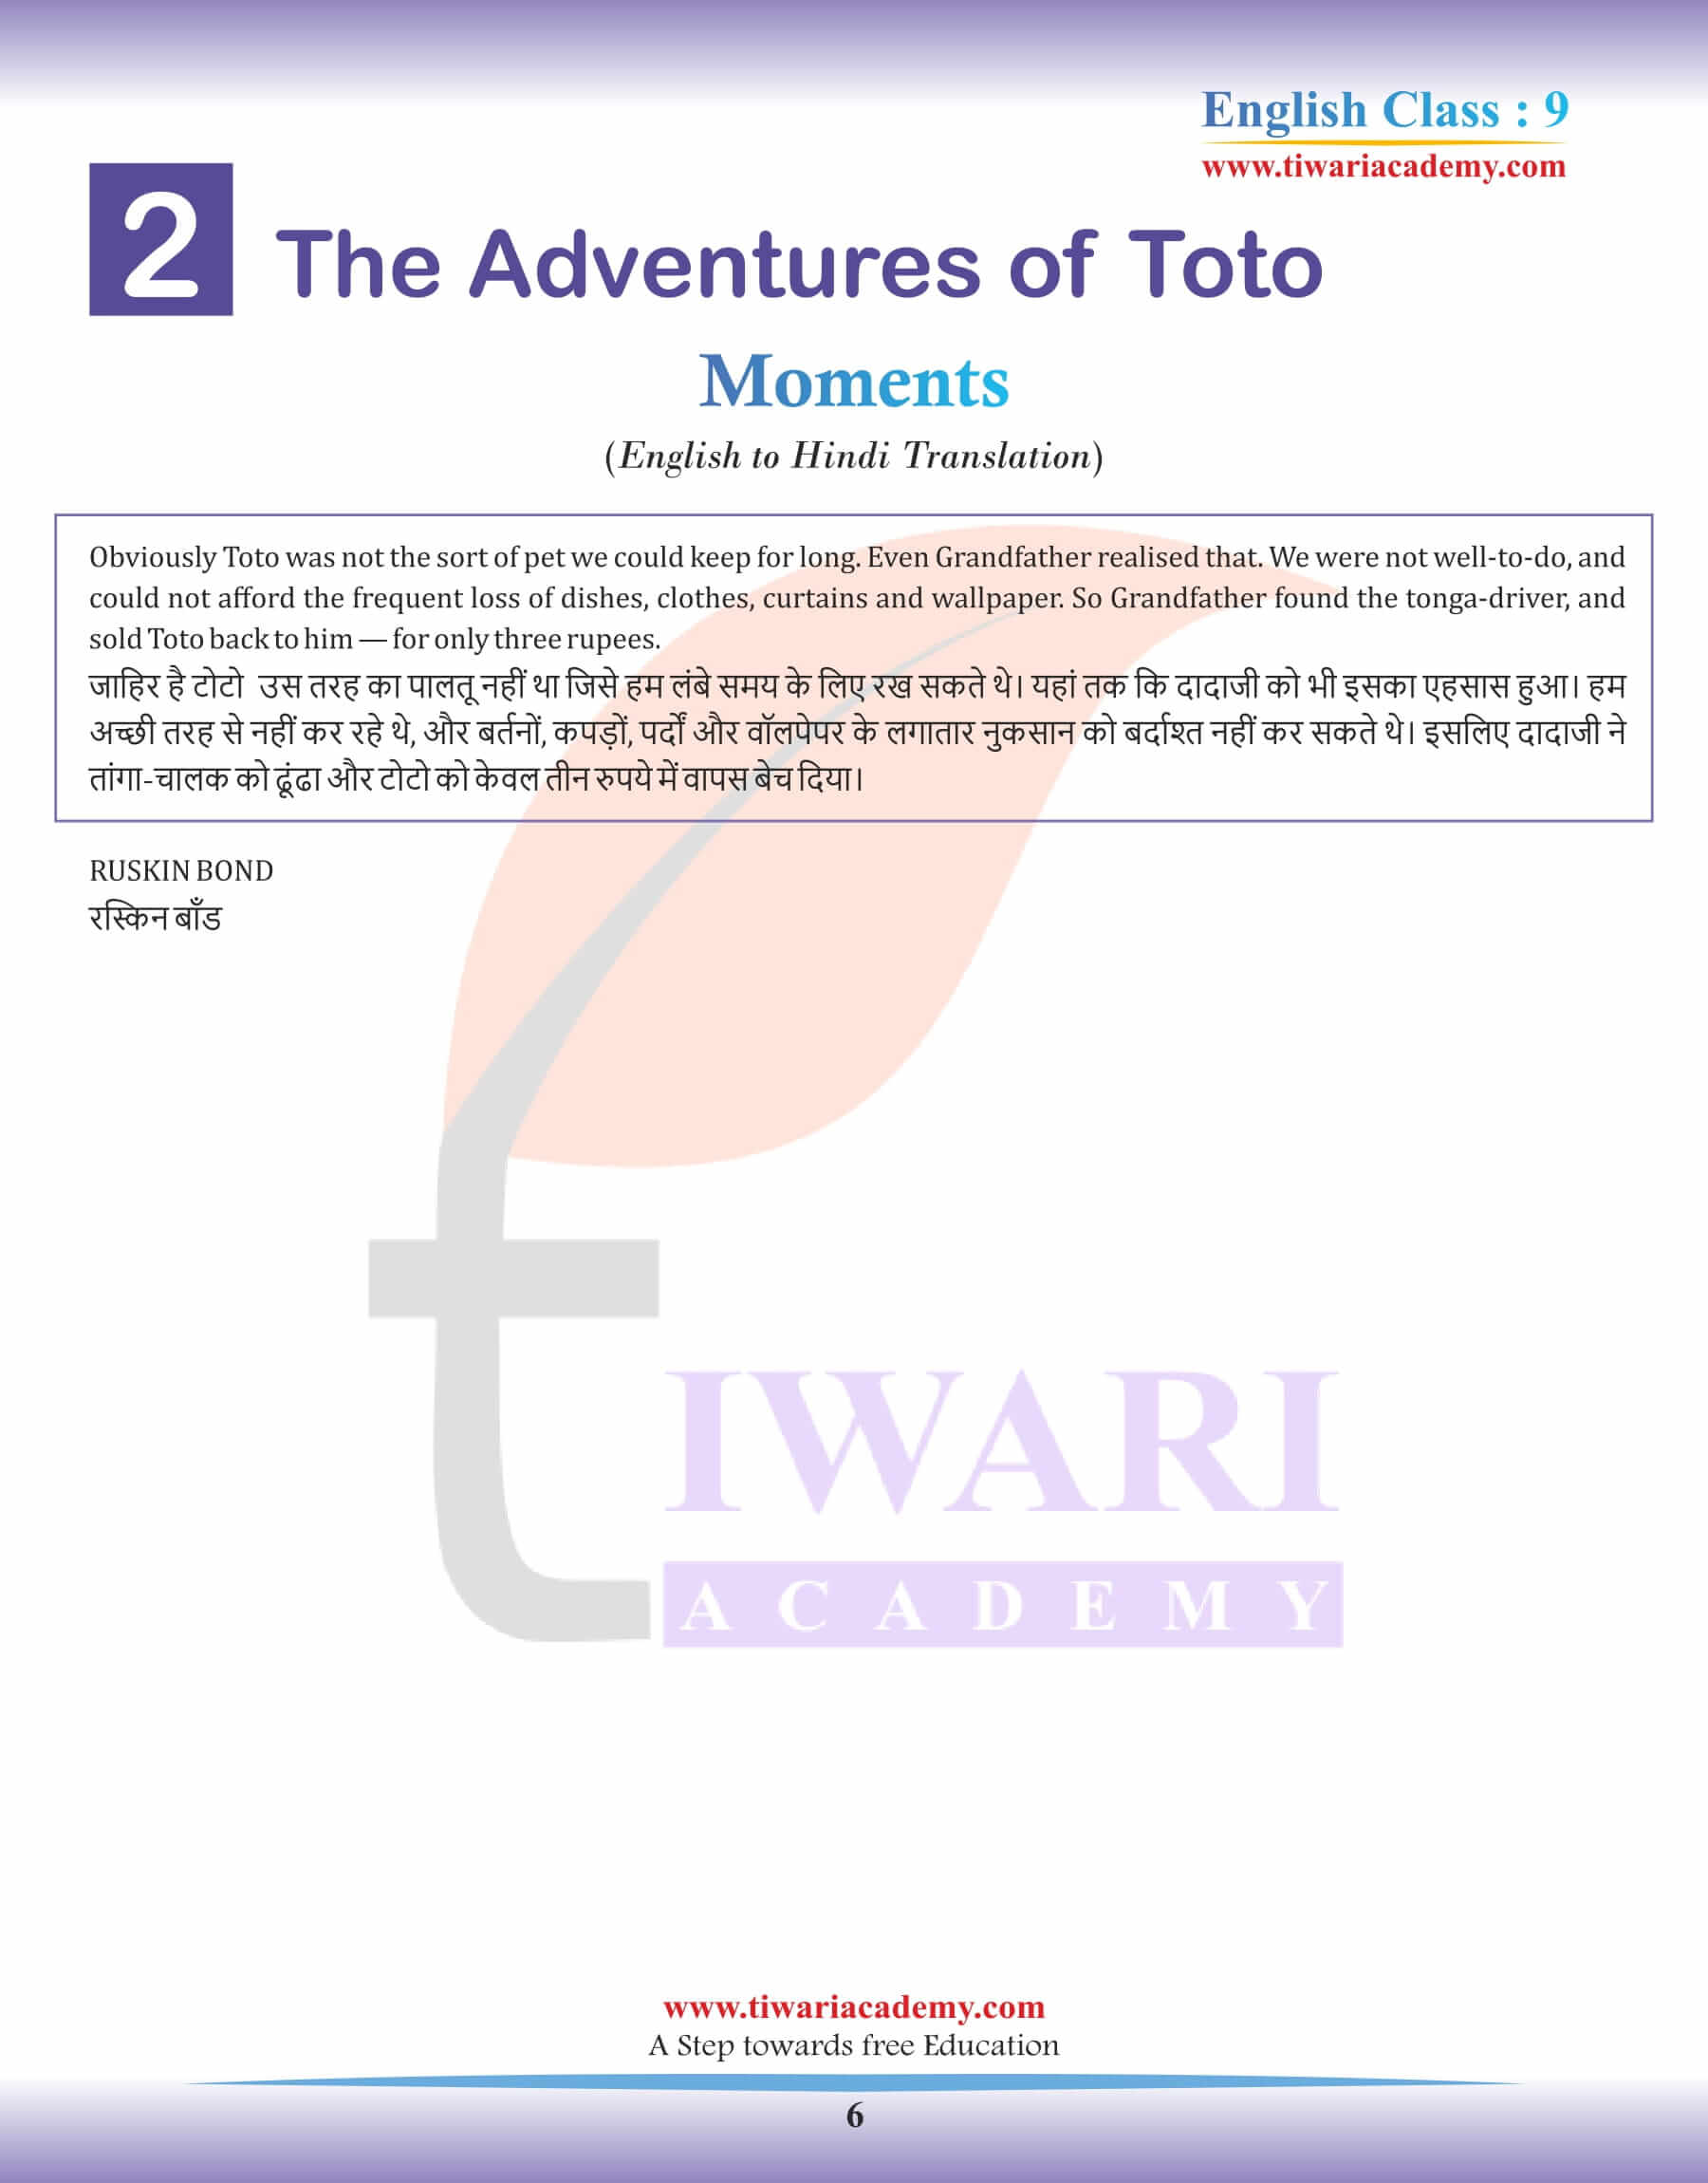 NCERT answers for Class 9 English Moments Chapter 2 Adventure of Toto